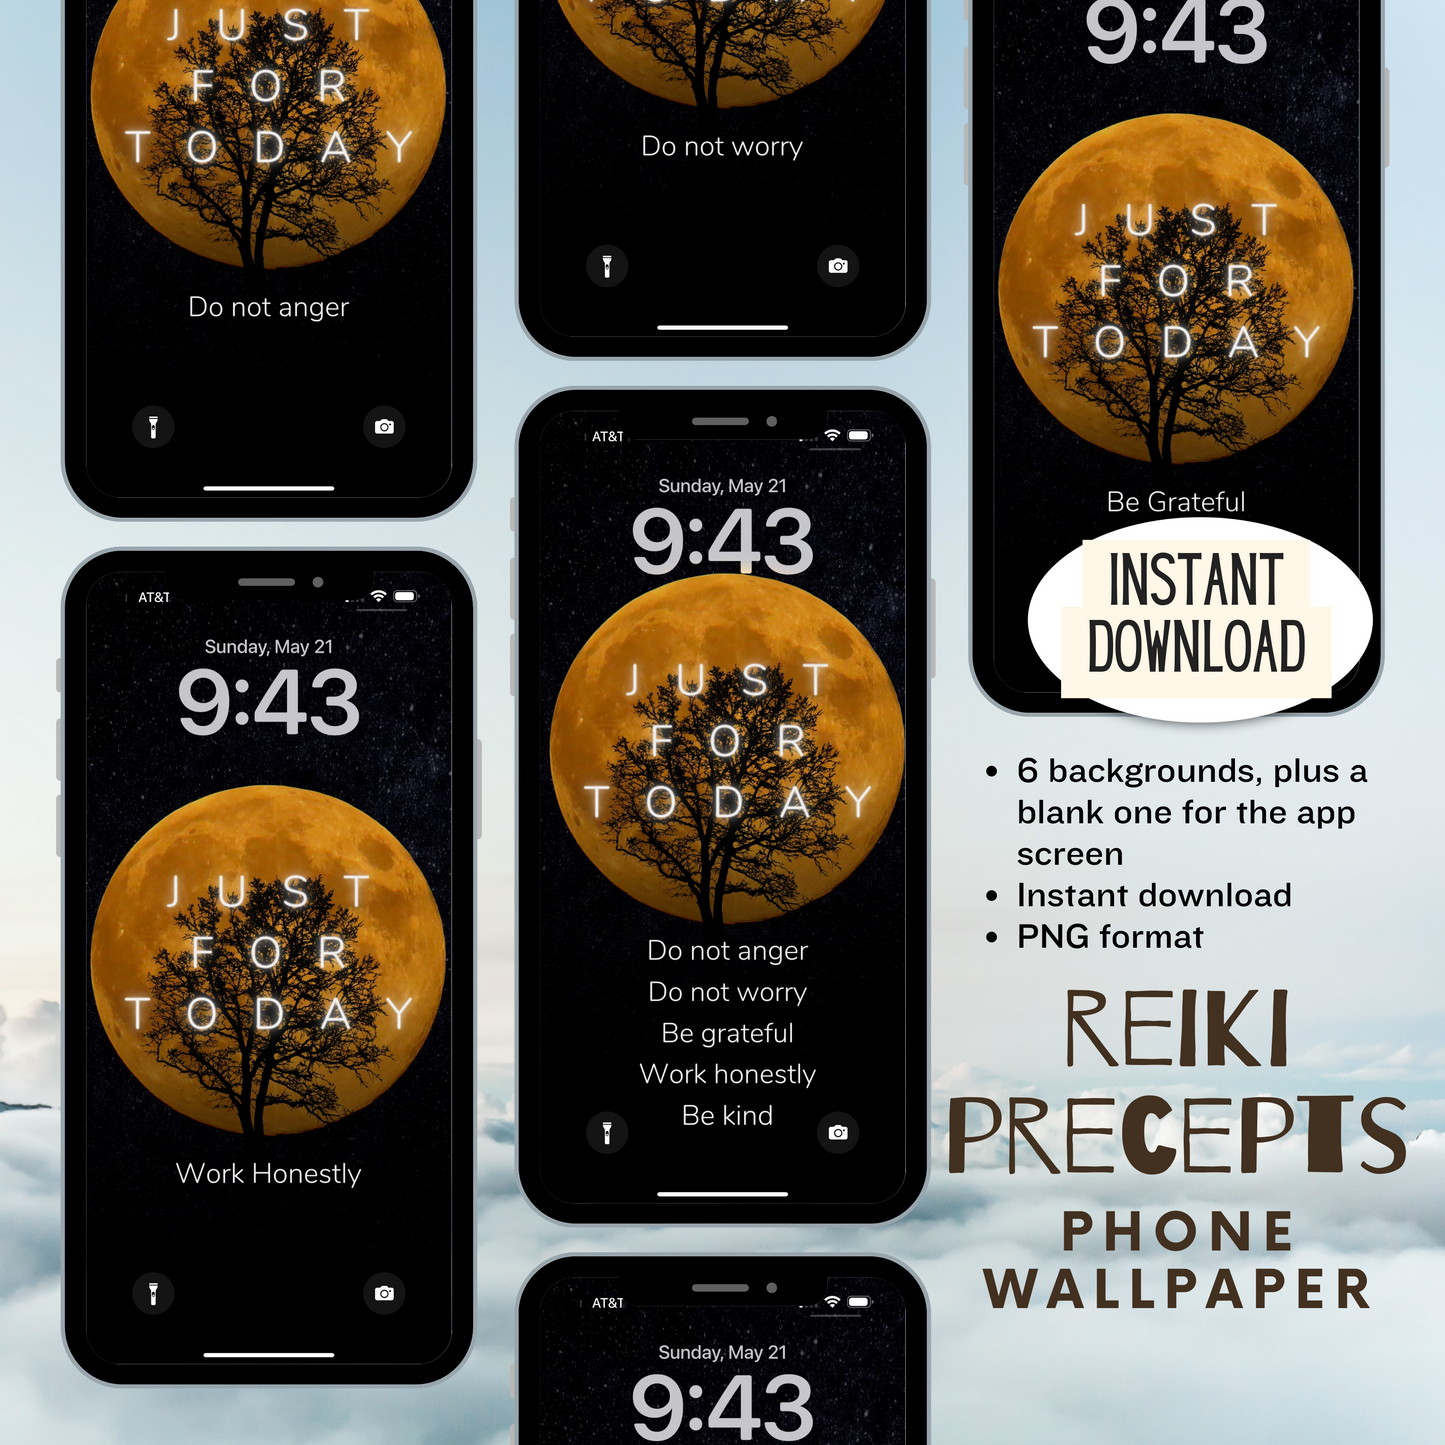 7 Phone Wallpaper files. Red Moon Reiki Precepts | Instant Download